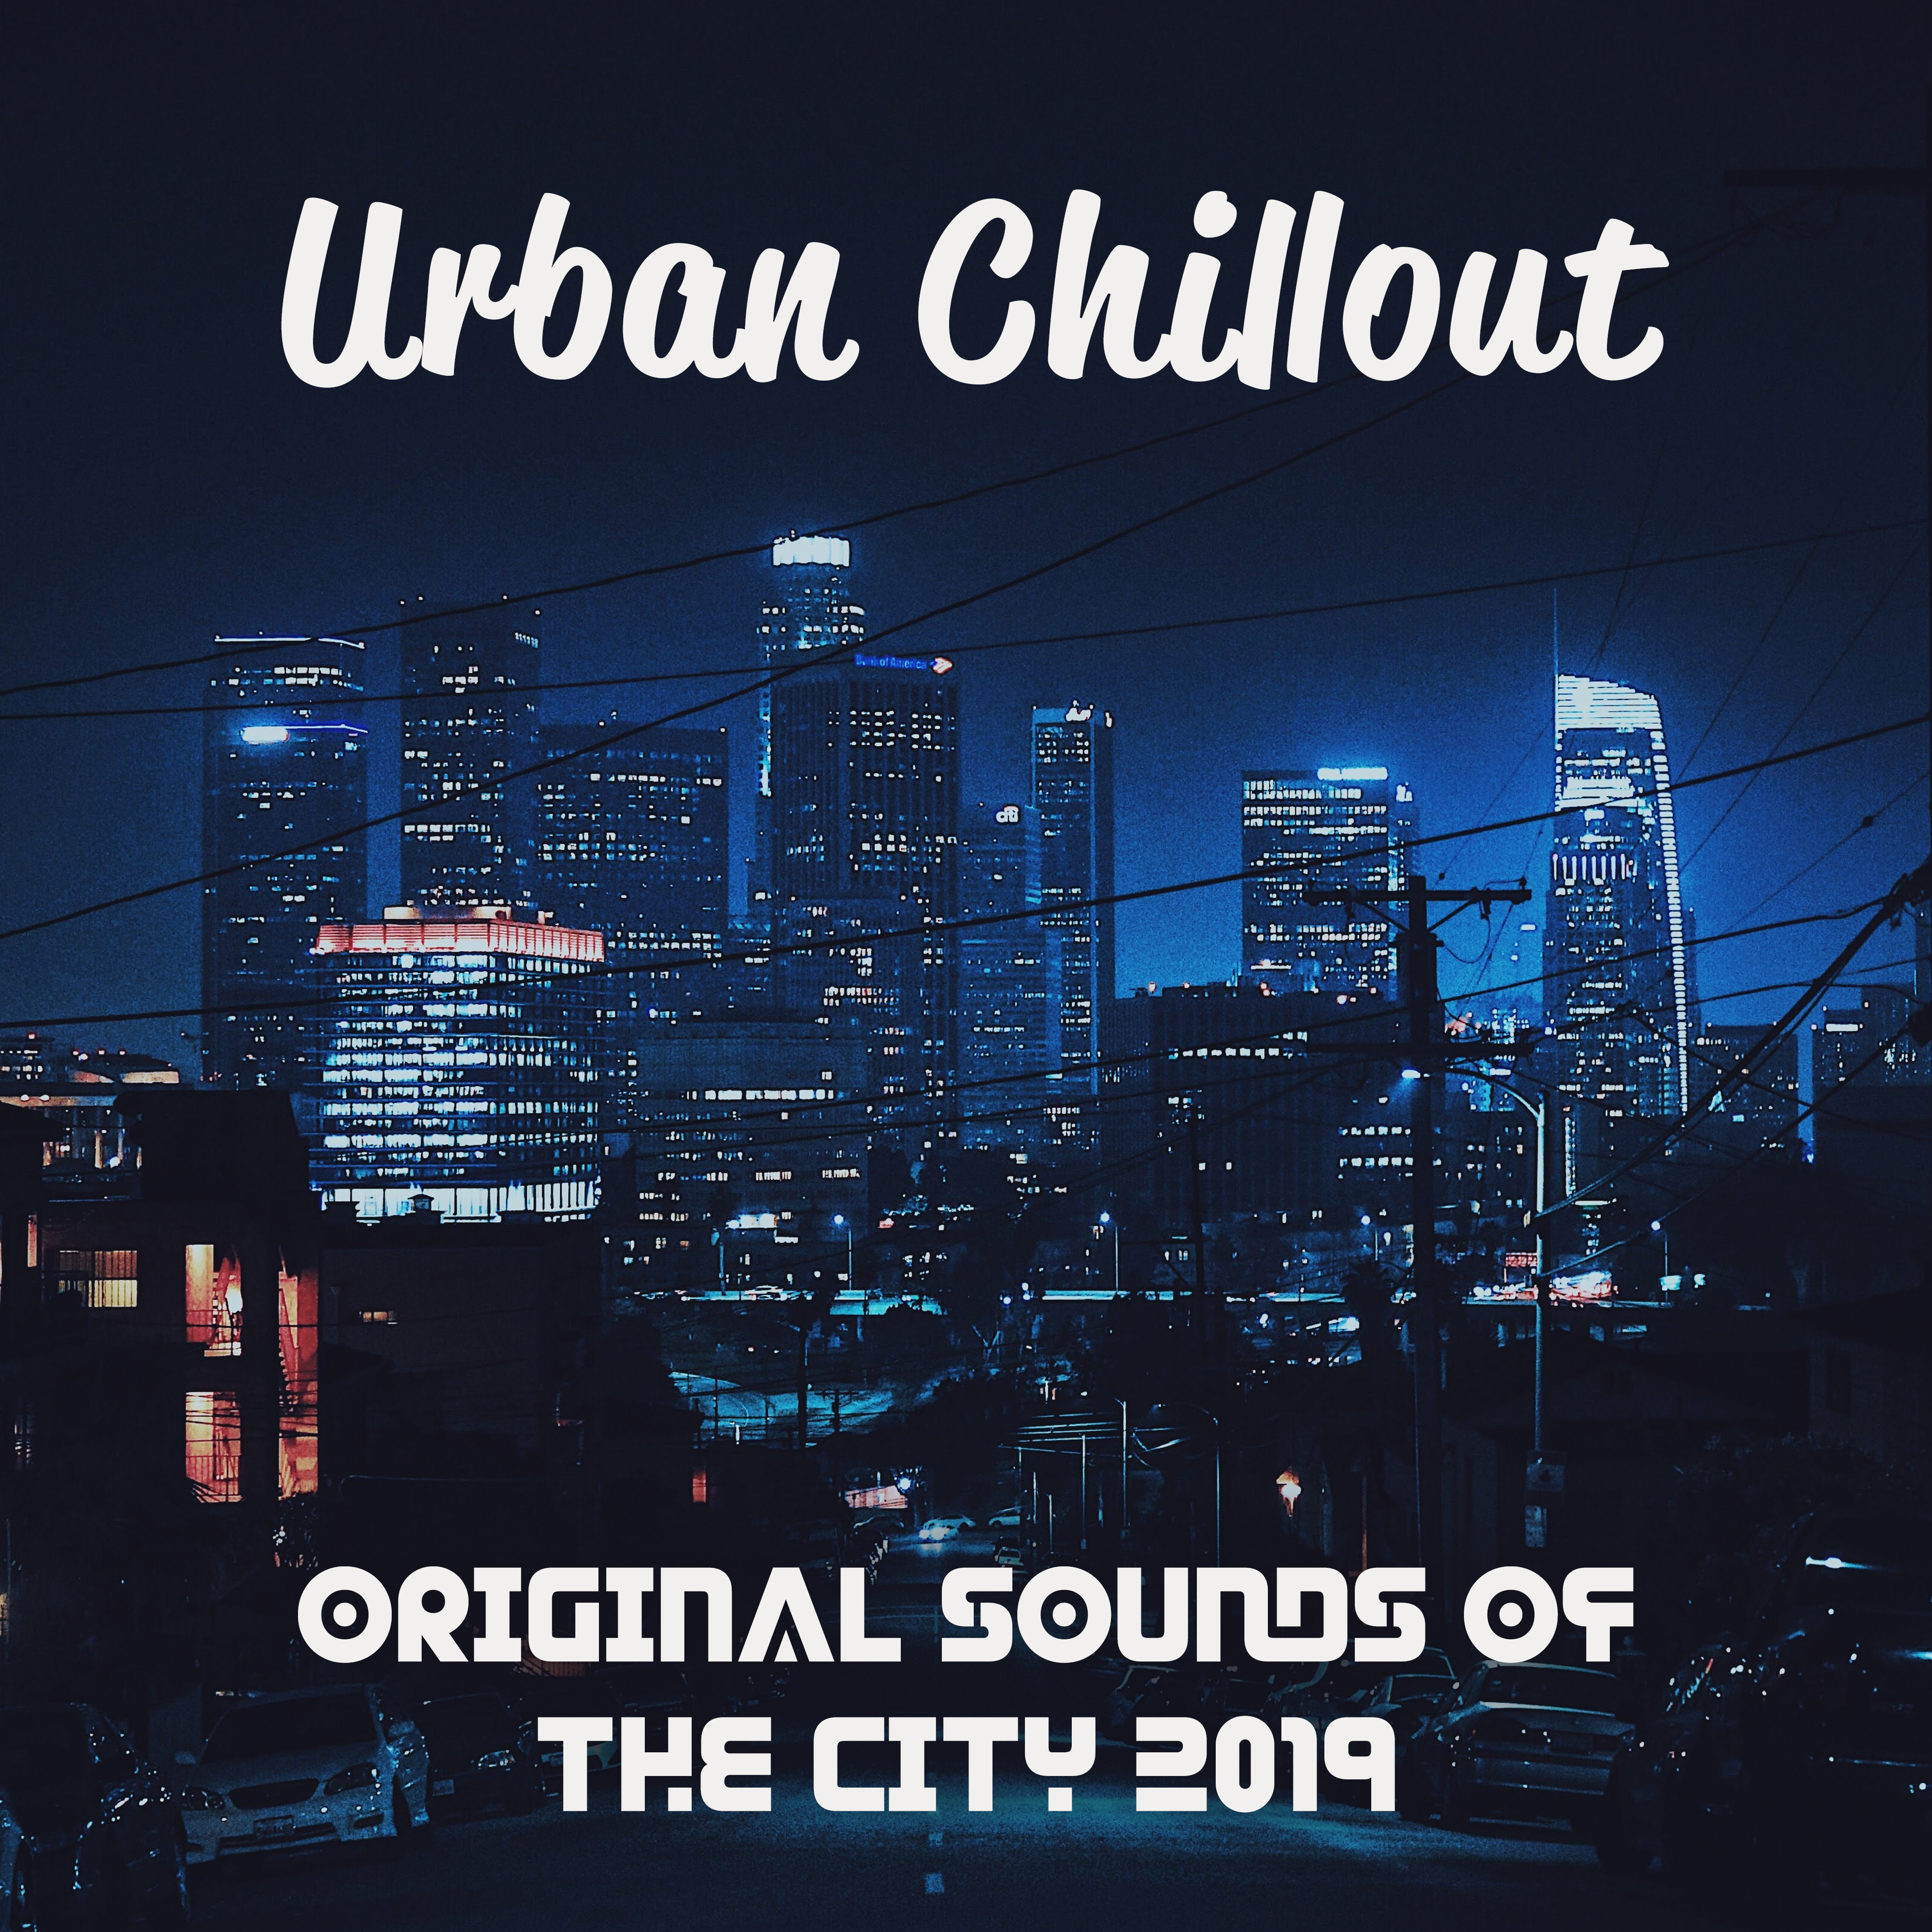 Urban Chillout – Original Sounds of the City 2019